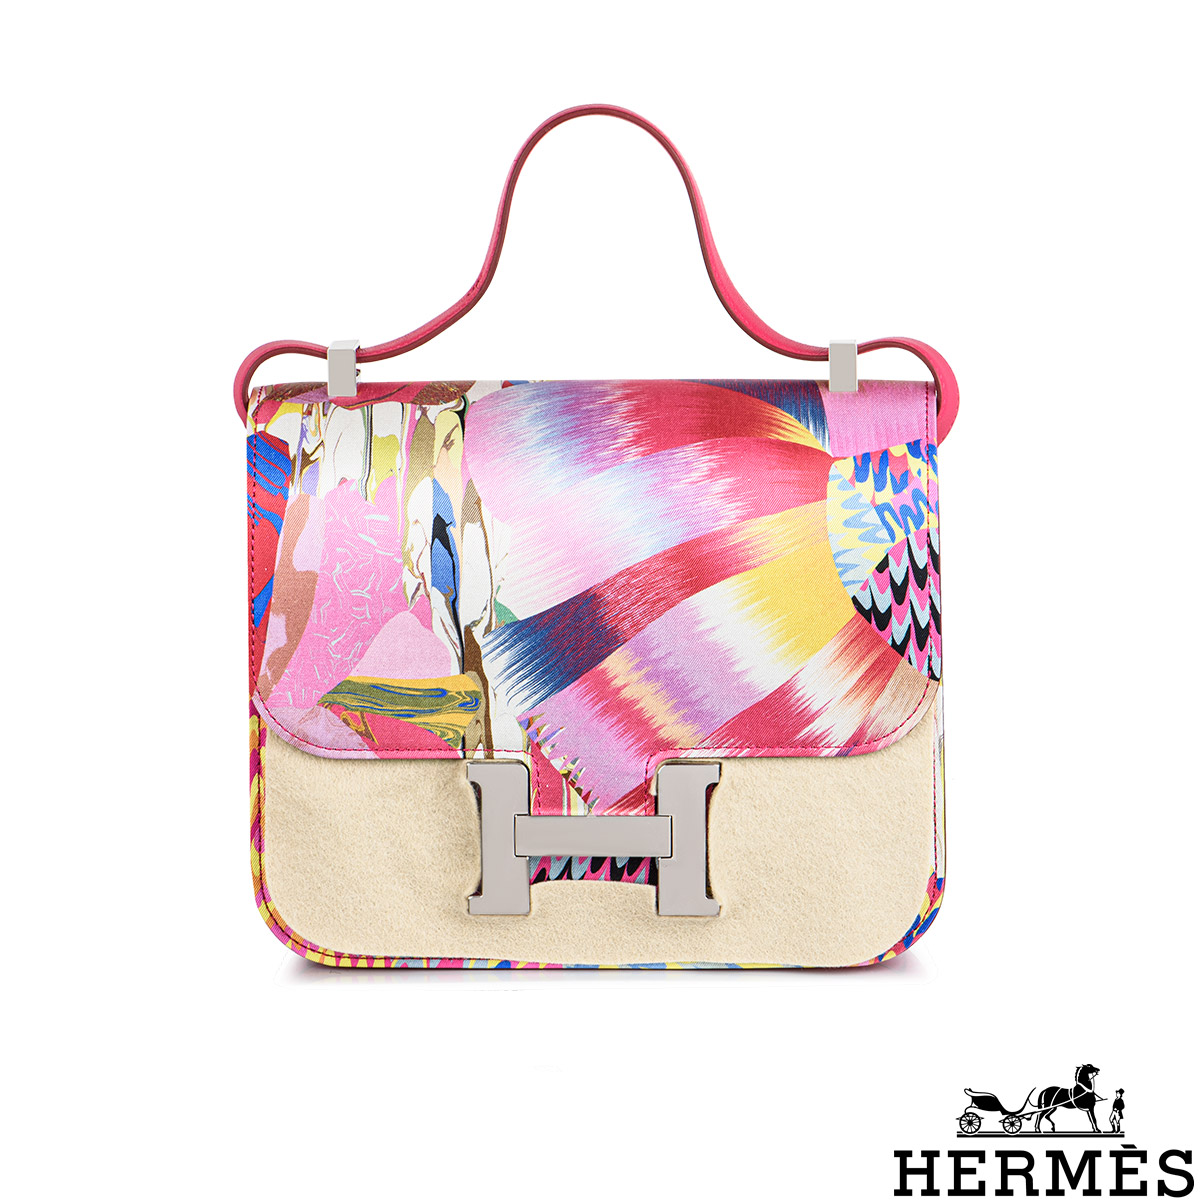 Hermès Limited Edition Constance 24cm Marble Silk PHW